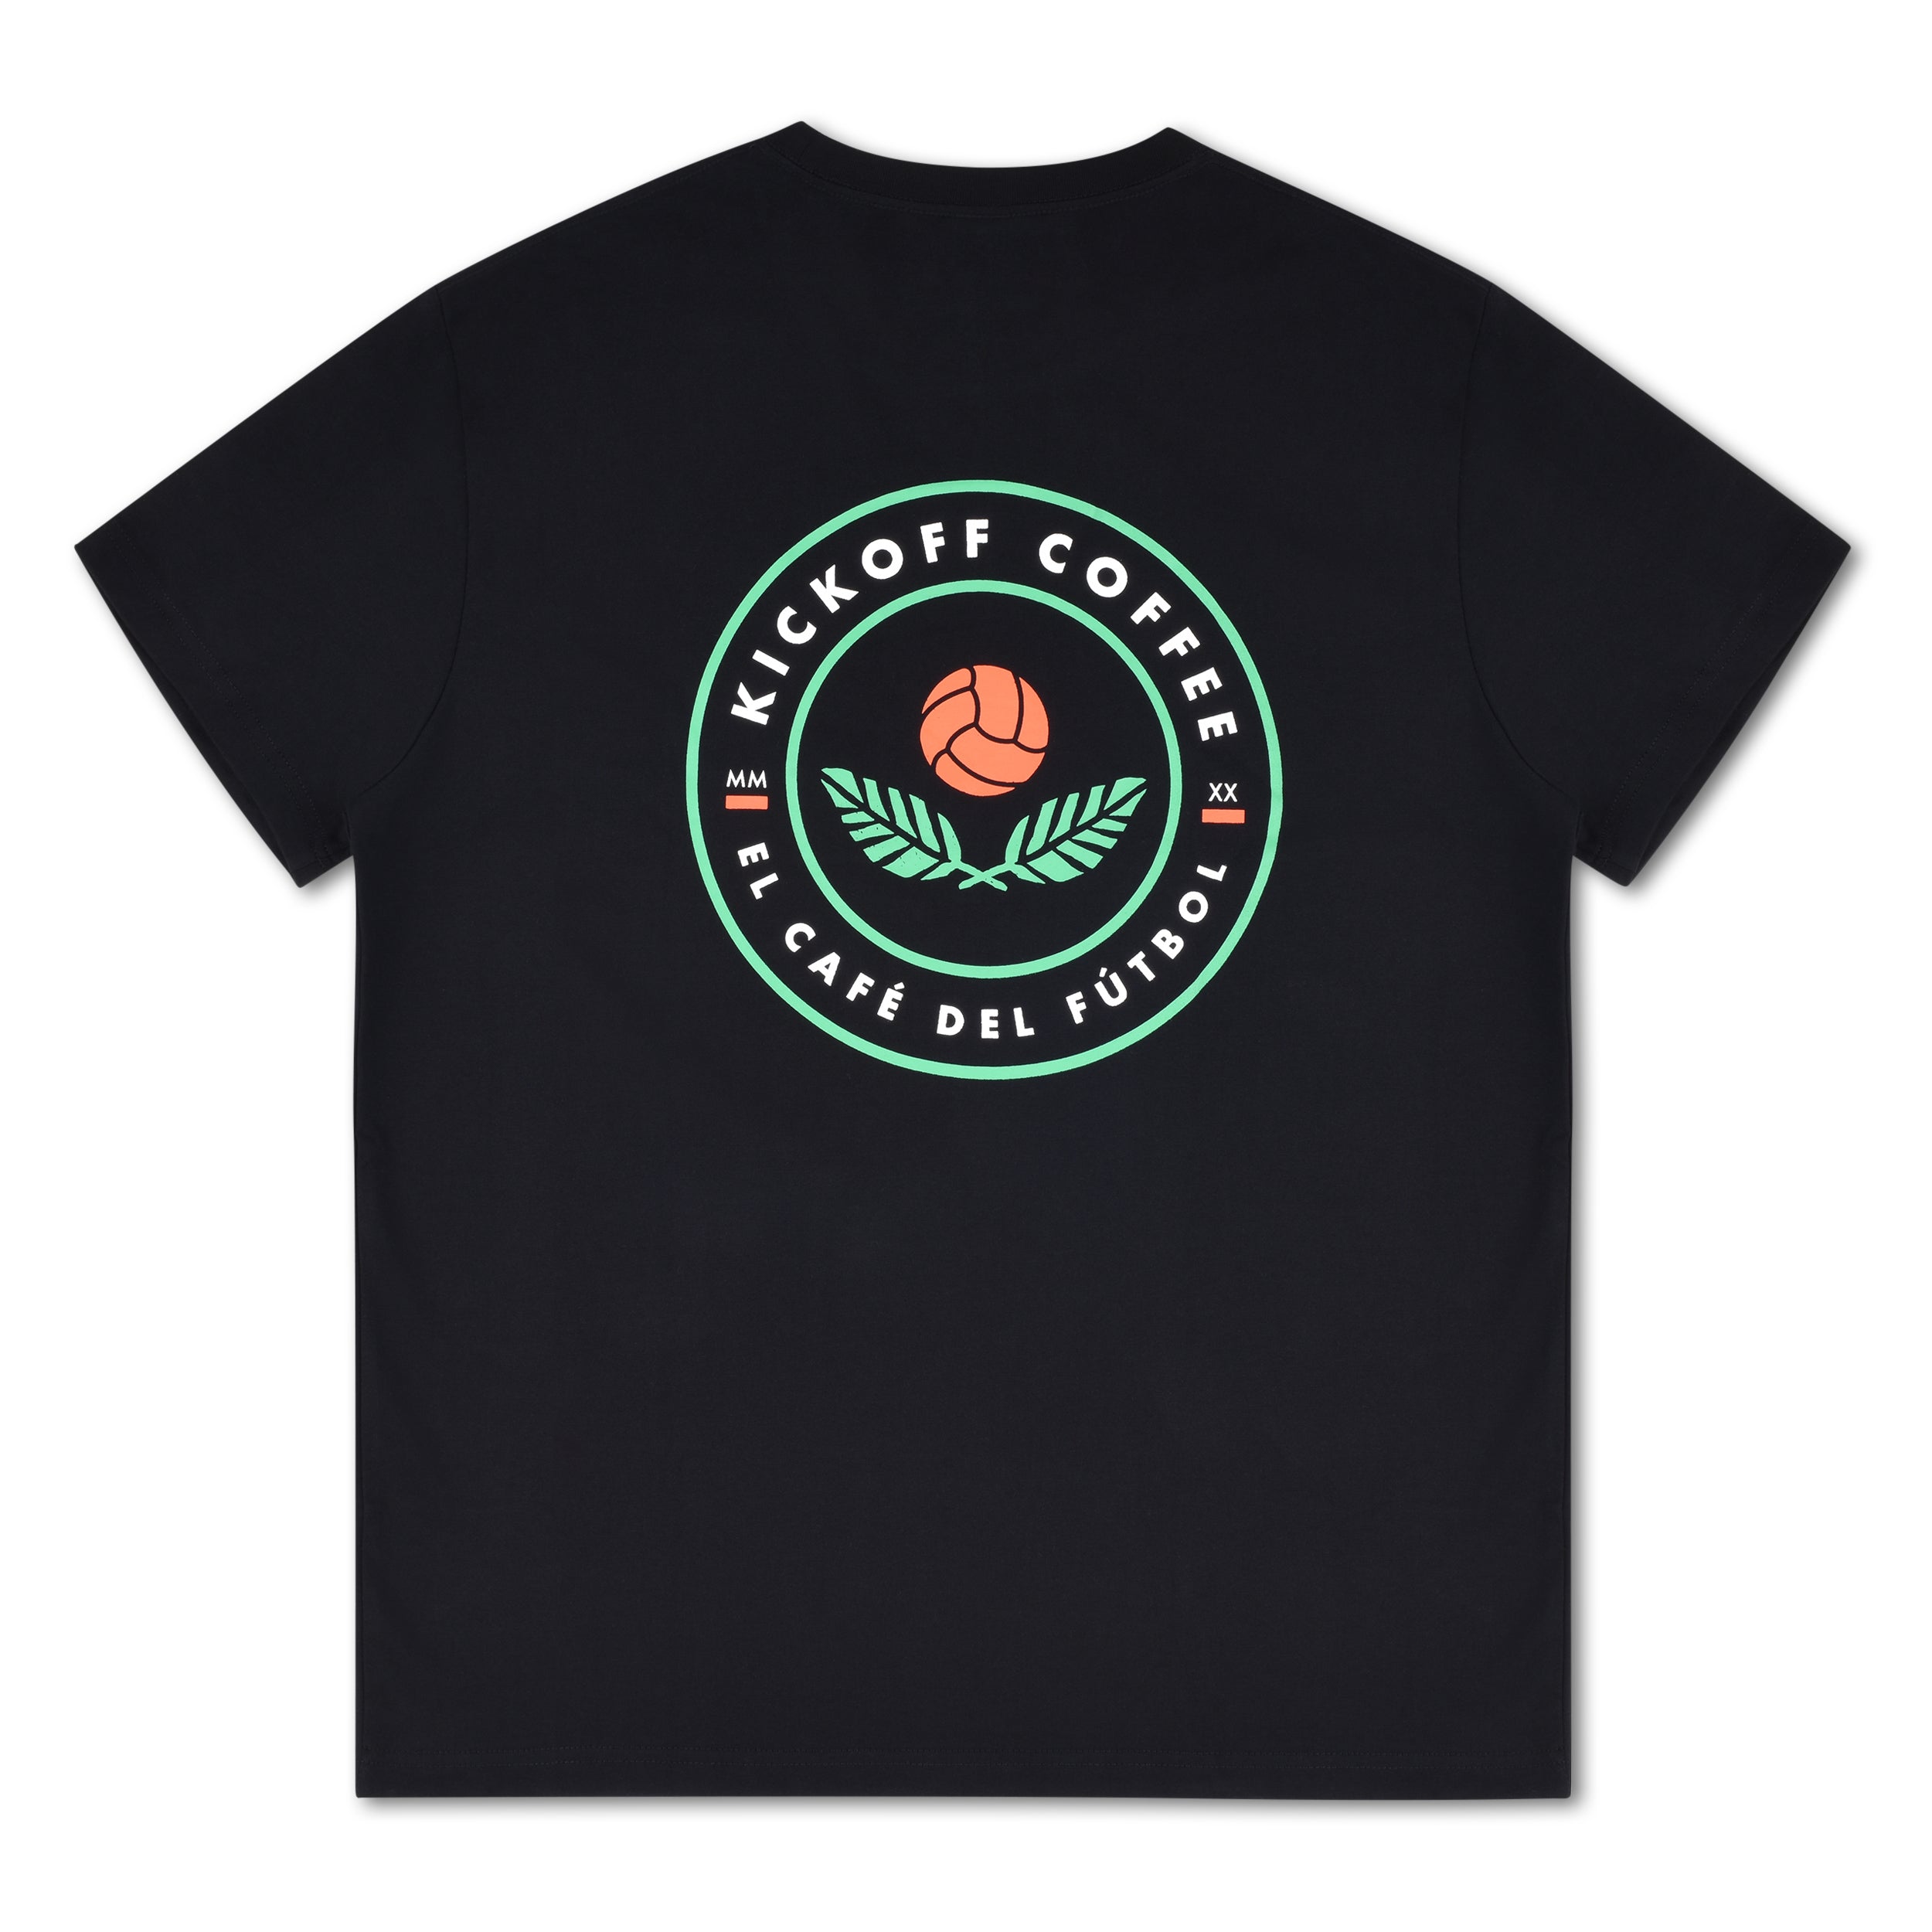 Black t-shirt with circle kickoff logo in the back